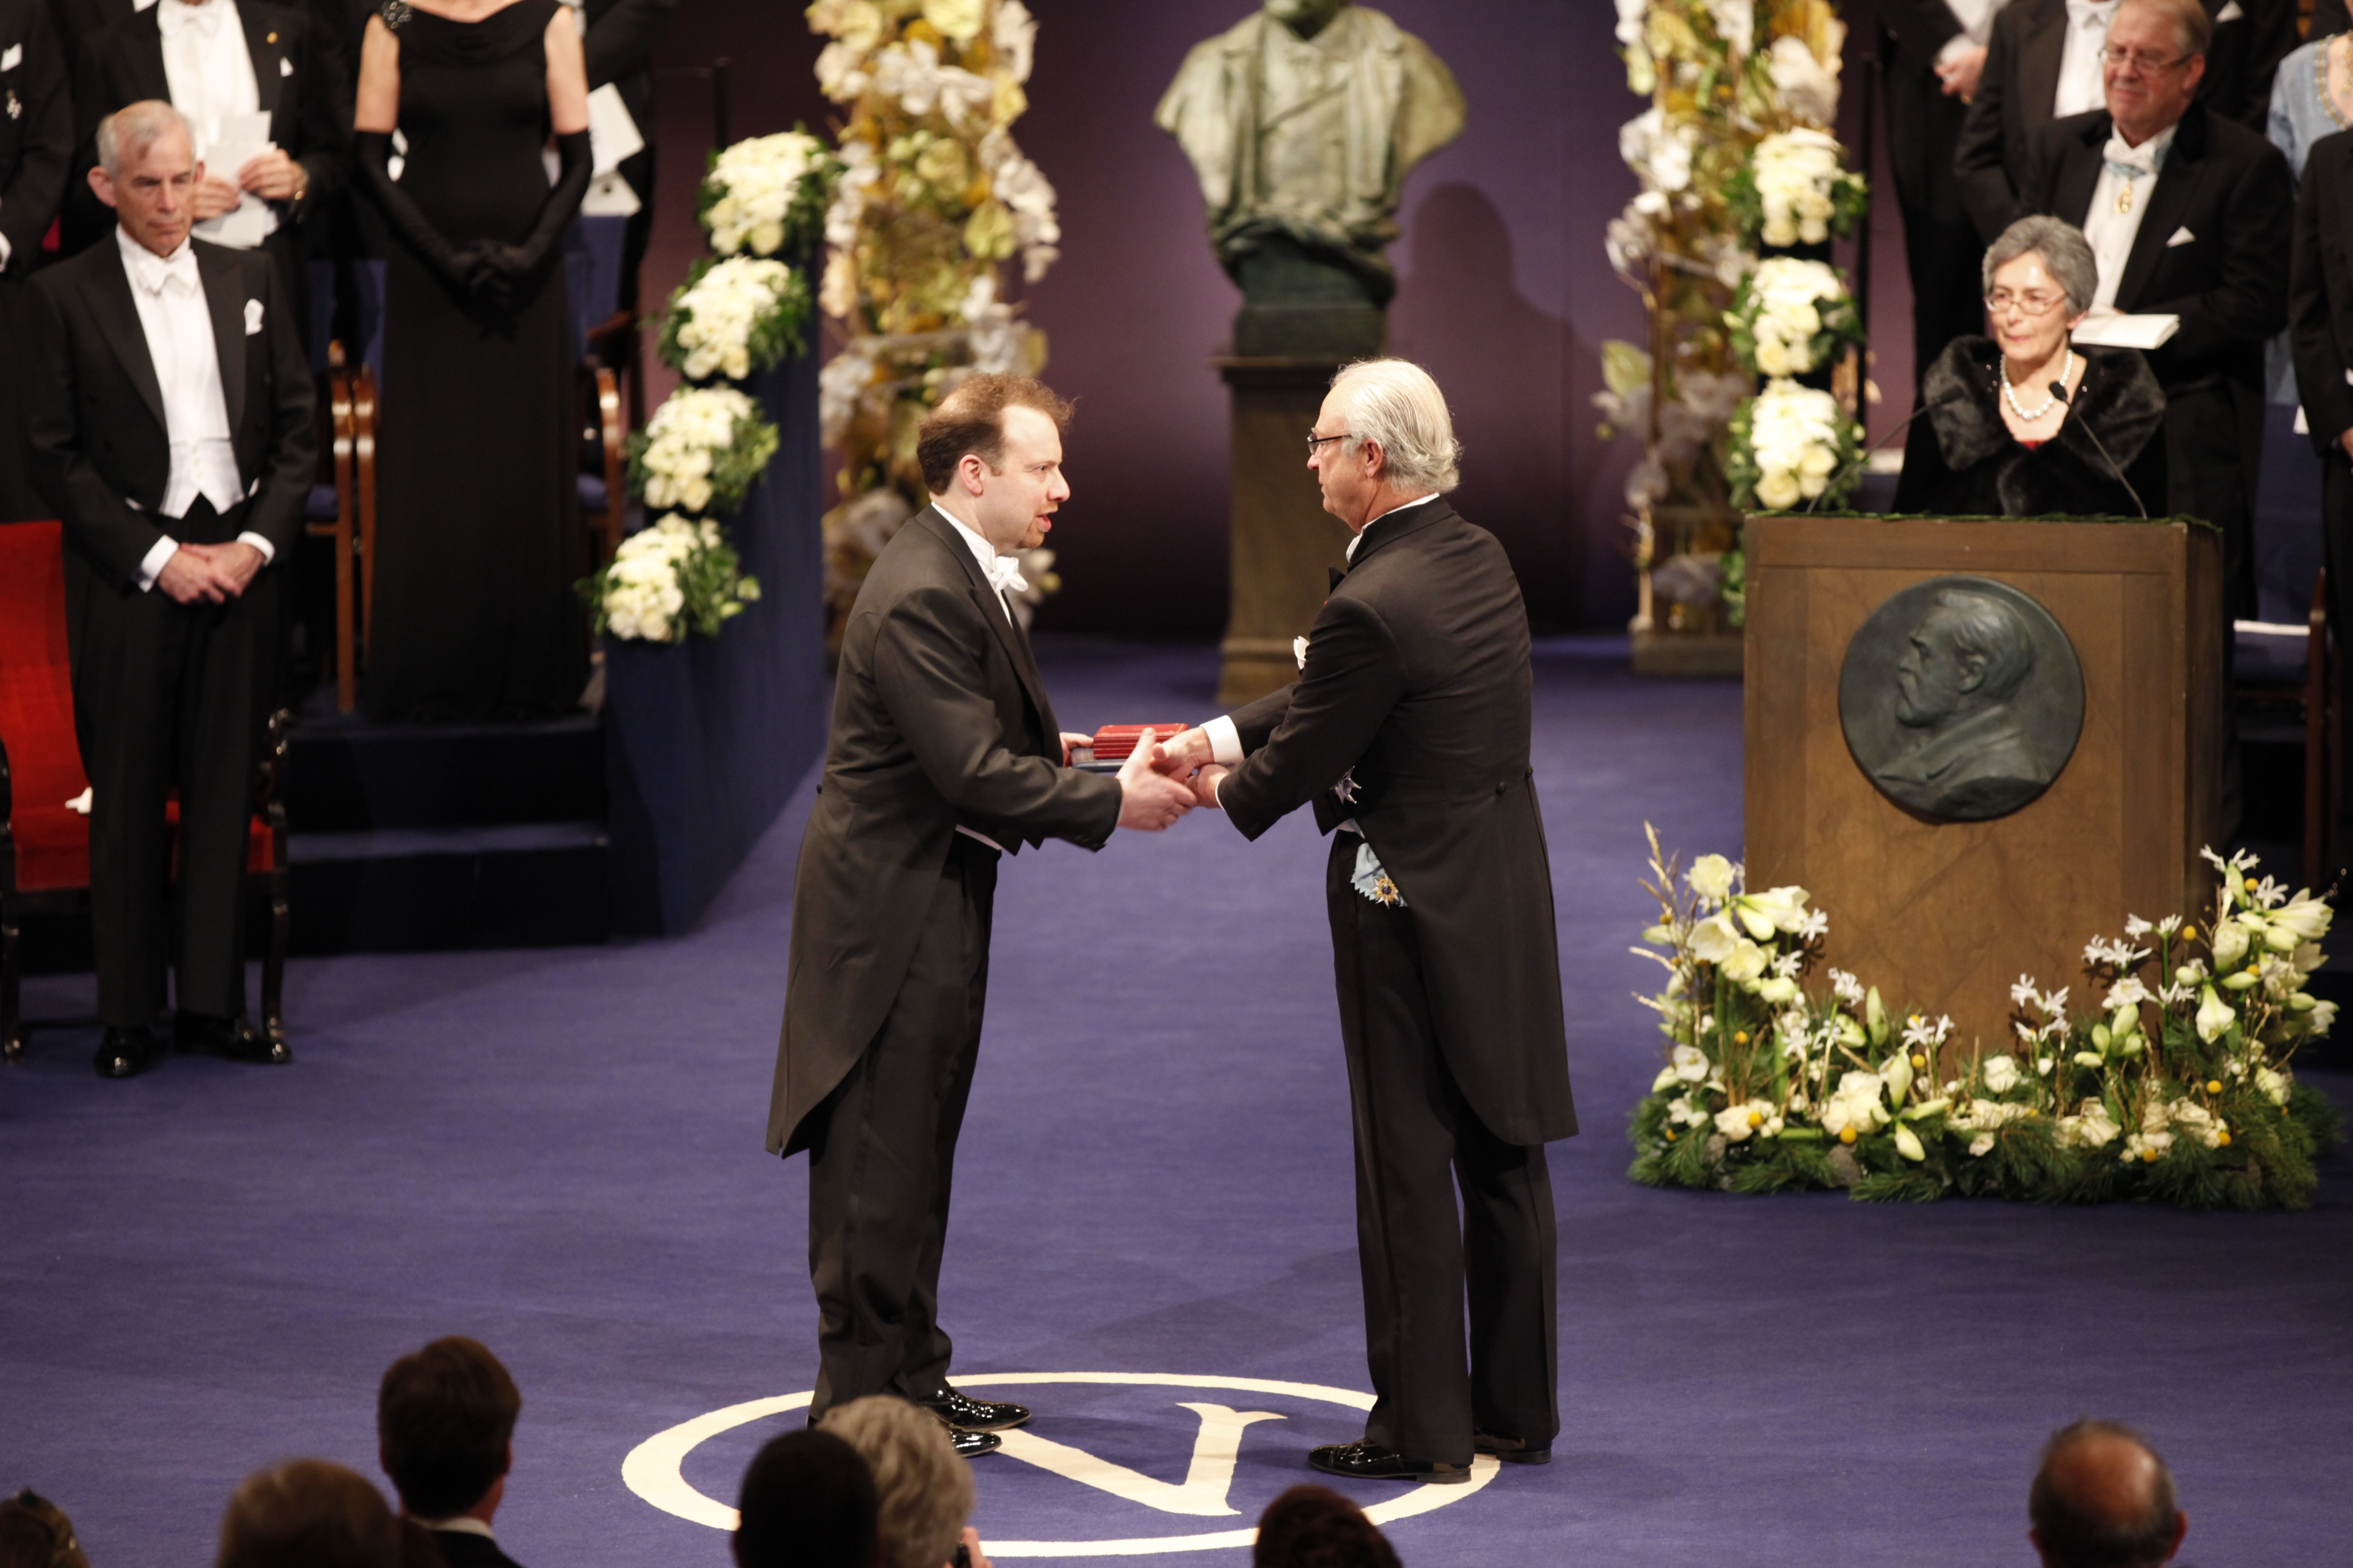 Astronomer Adam Riess shakes hands with an official at the Nobel Prize ceremony as he receives his medal.